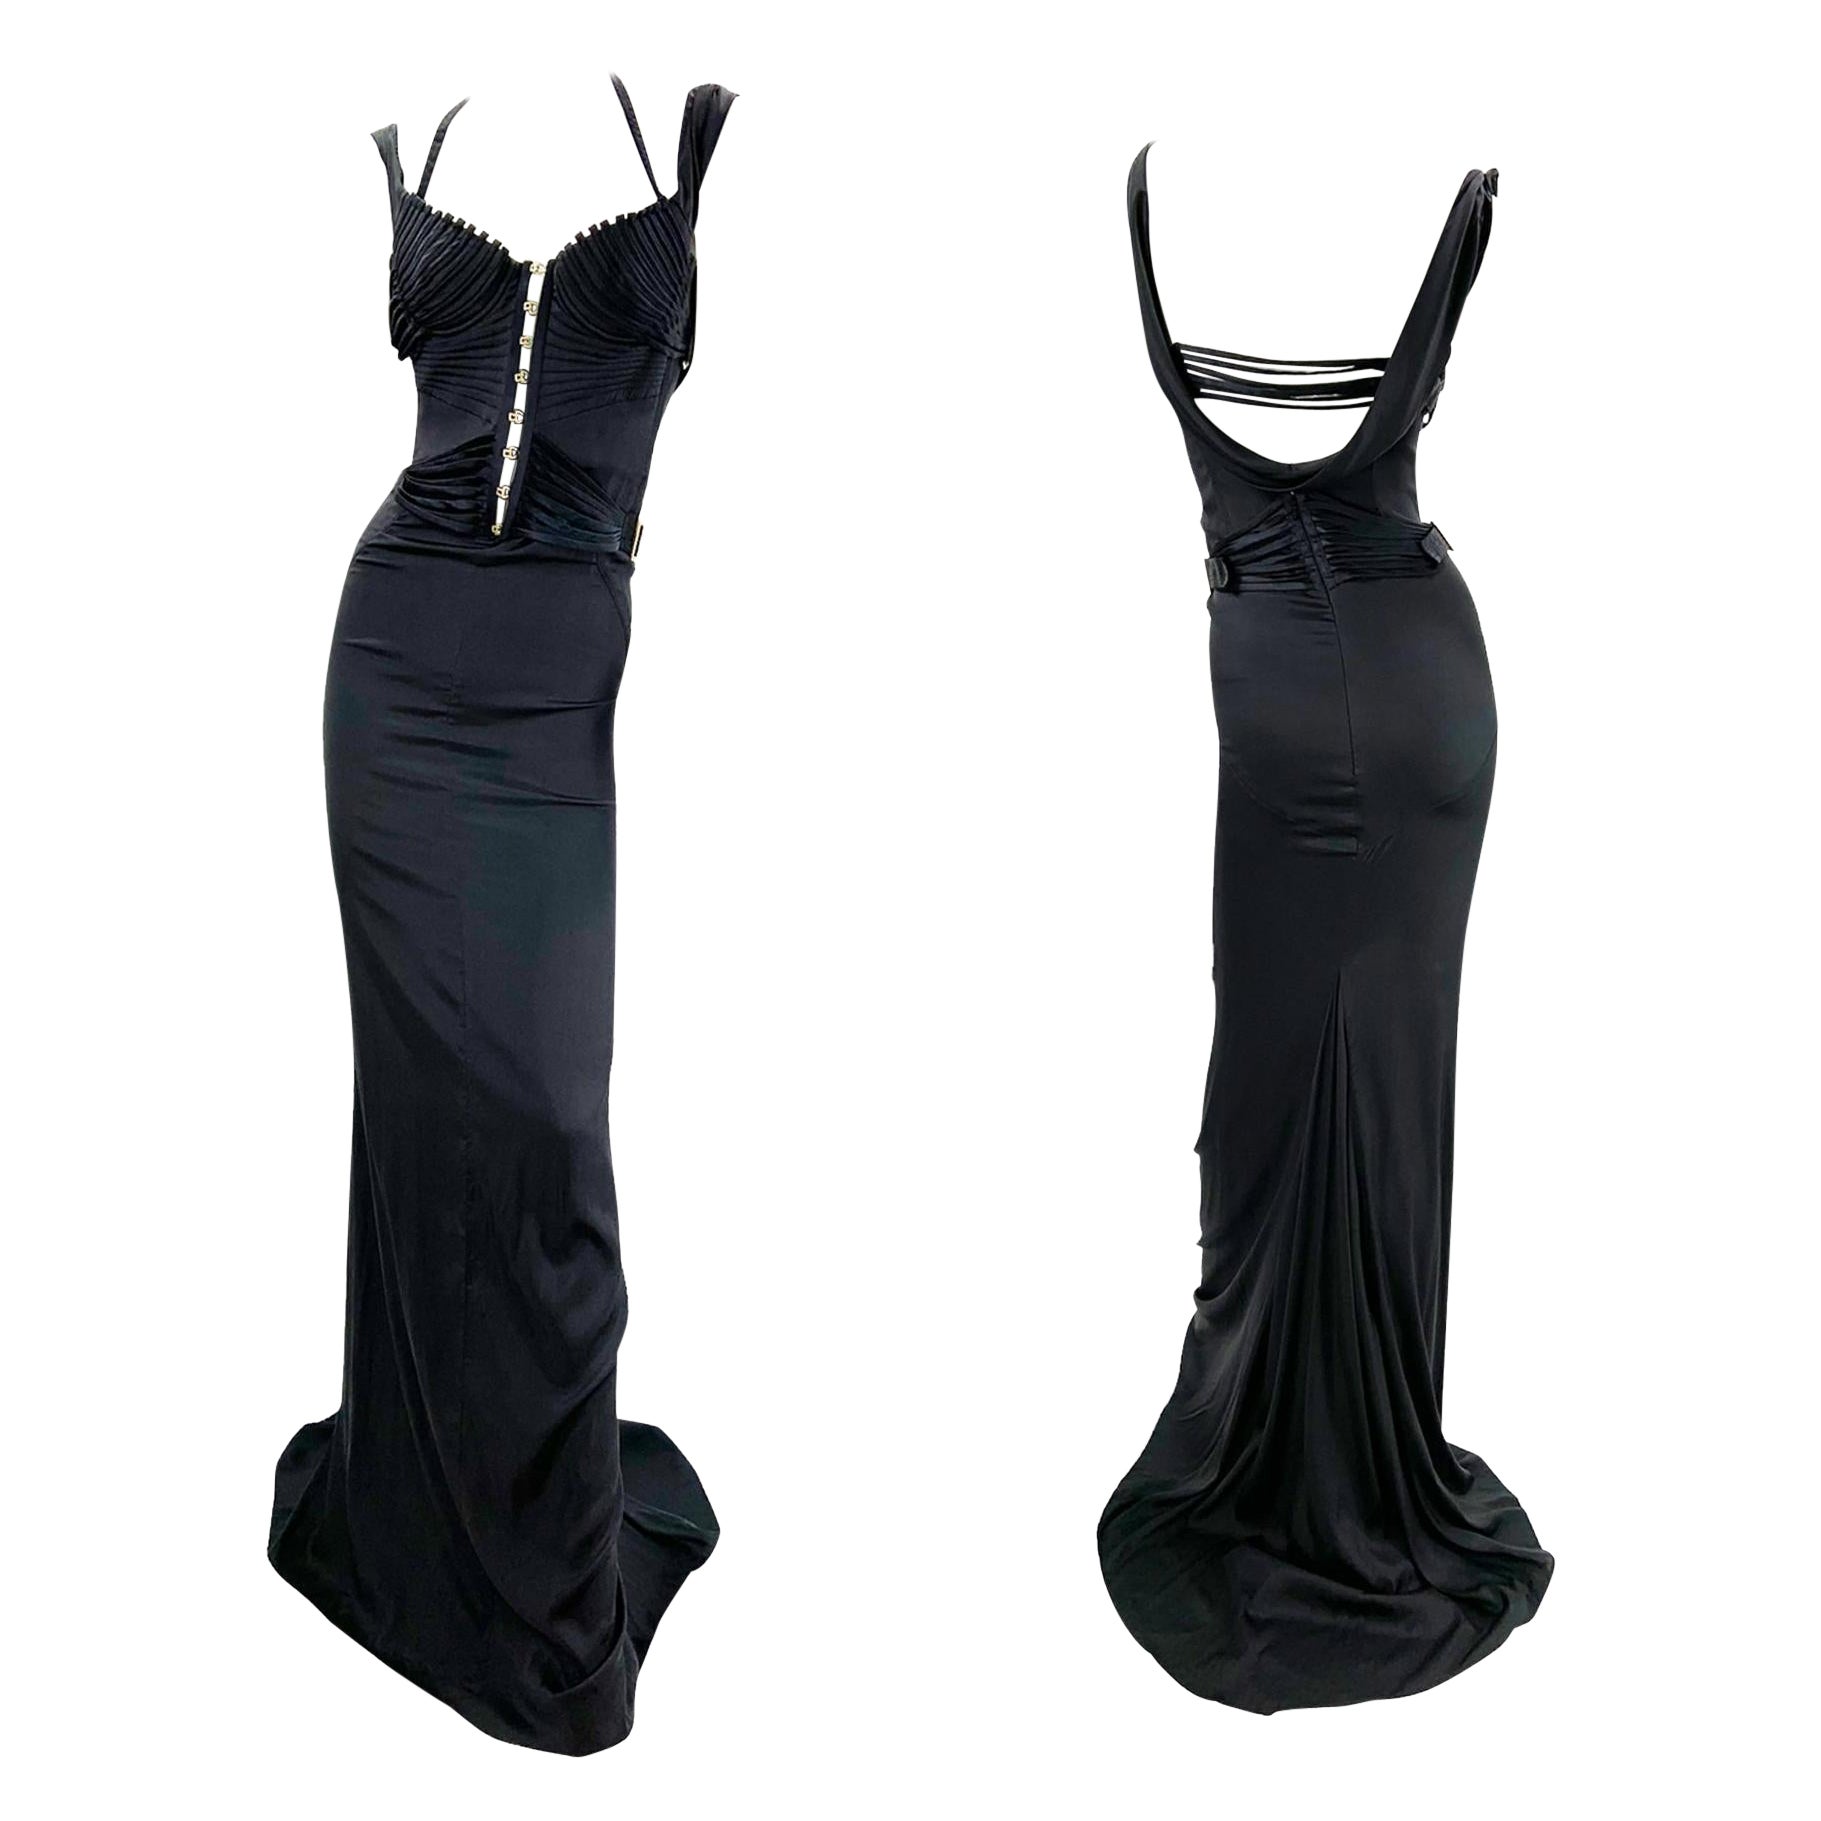 Iconic Tom Ford for Gucci F/W 2003 Runway Black Corset Stretch Dress Gown 38 For Sale